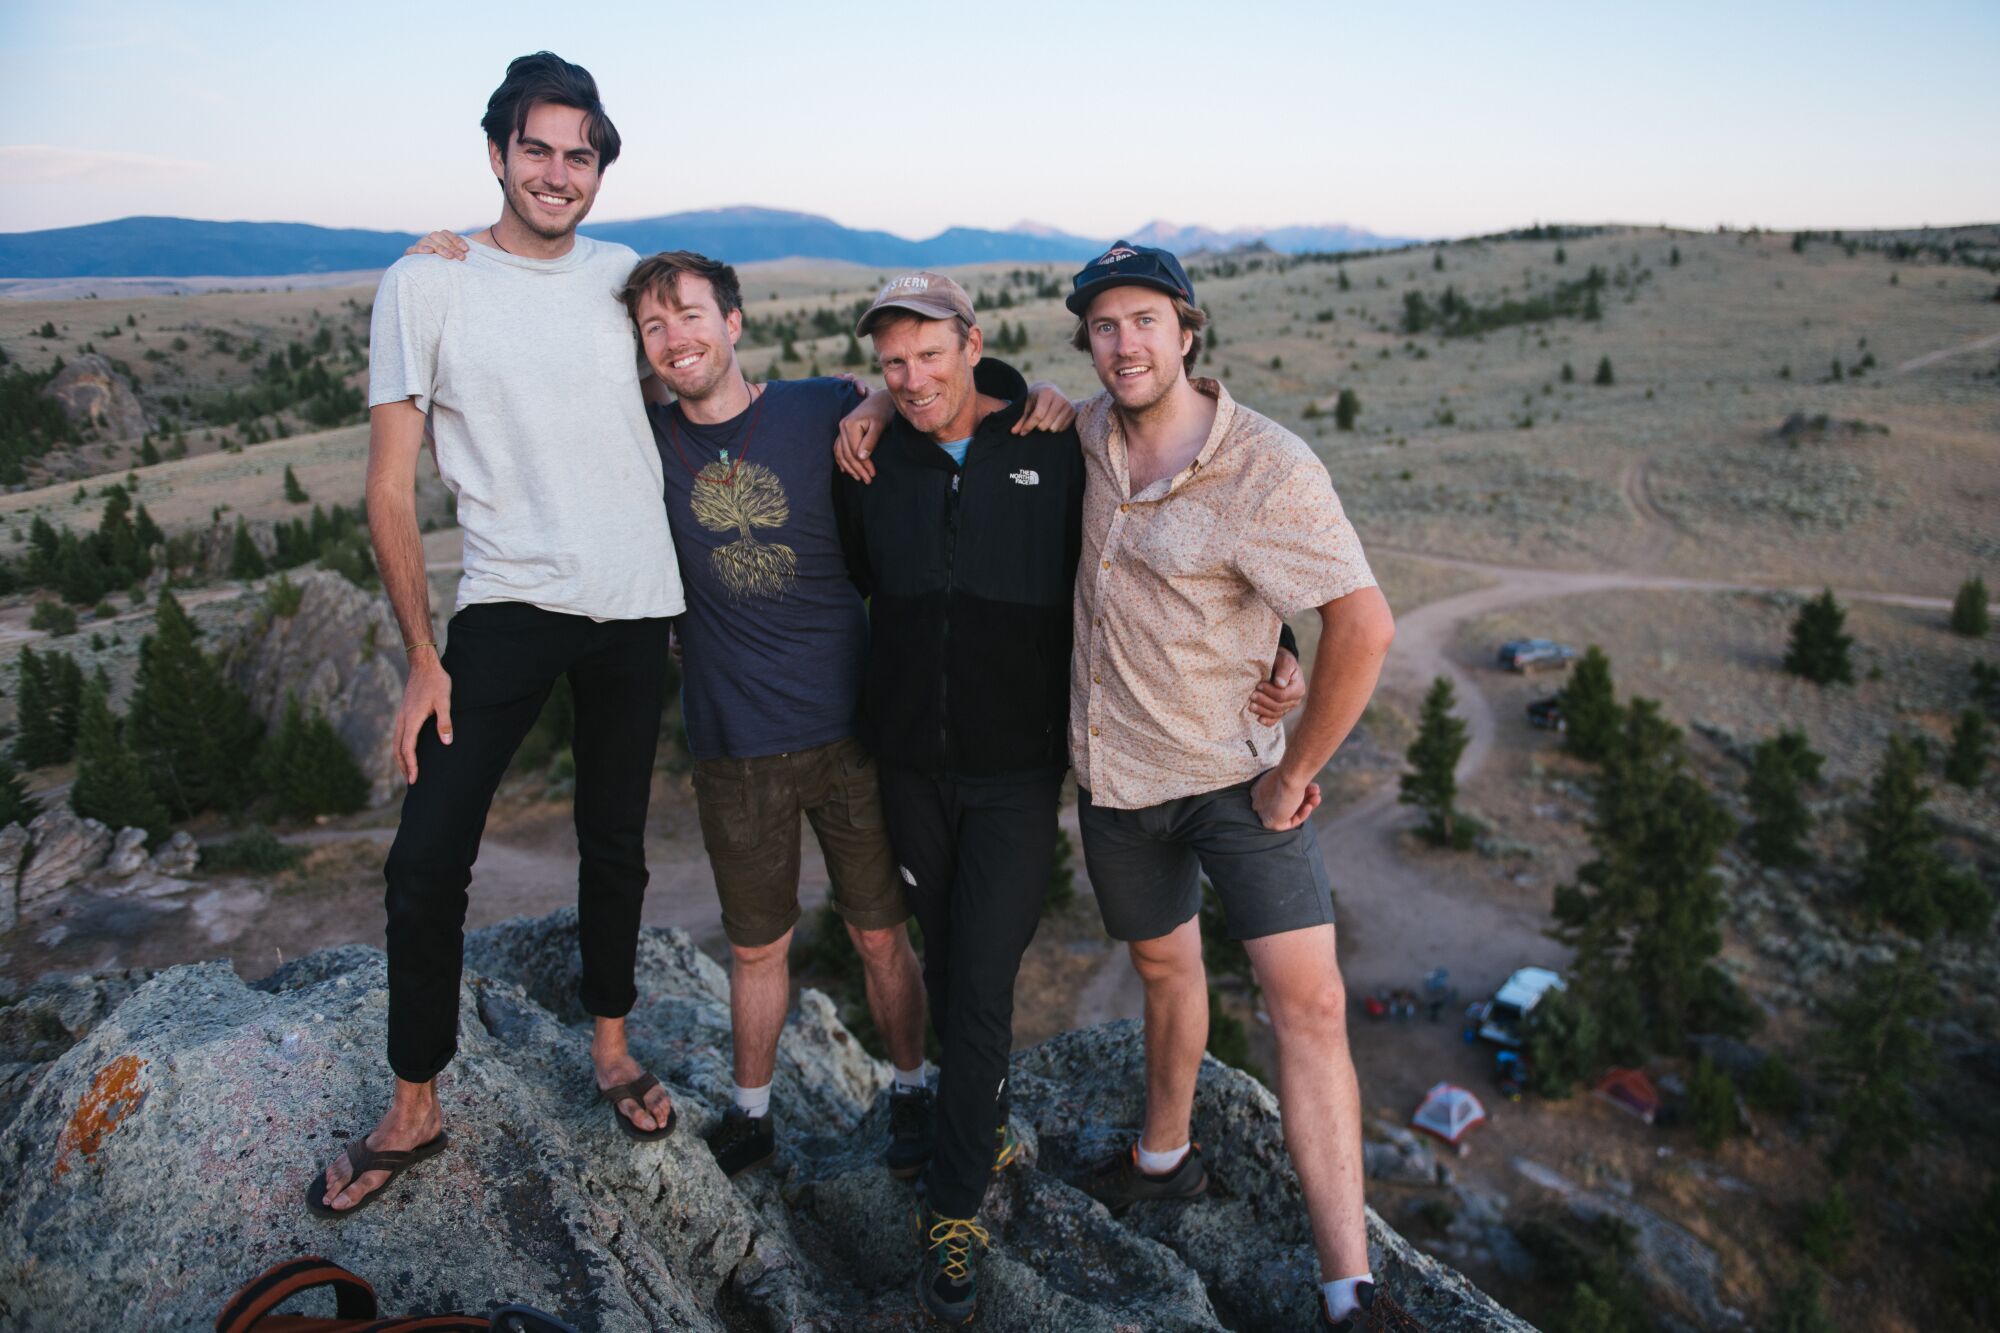 Four men stand together on a boulder with the landscape visible behind them.